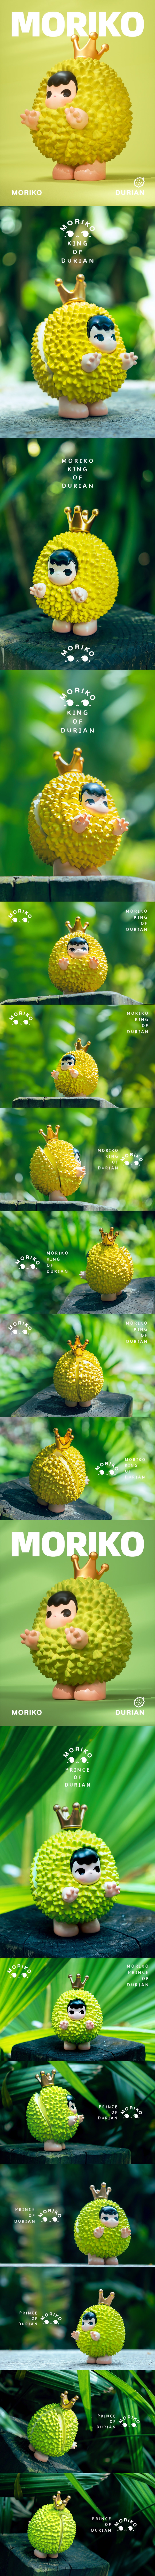 MoeDouble Durian King / Durian Prince Collectible Figurine